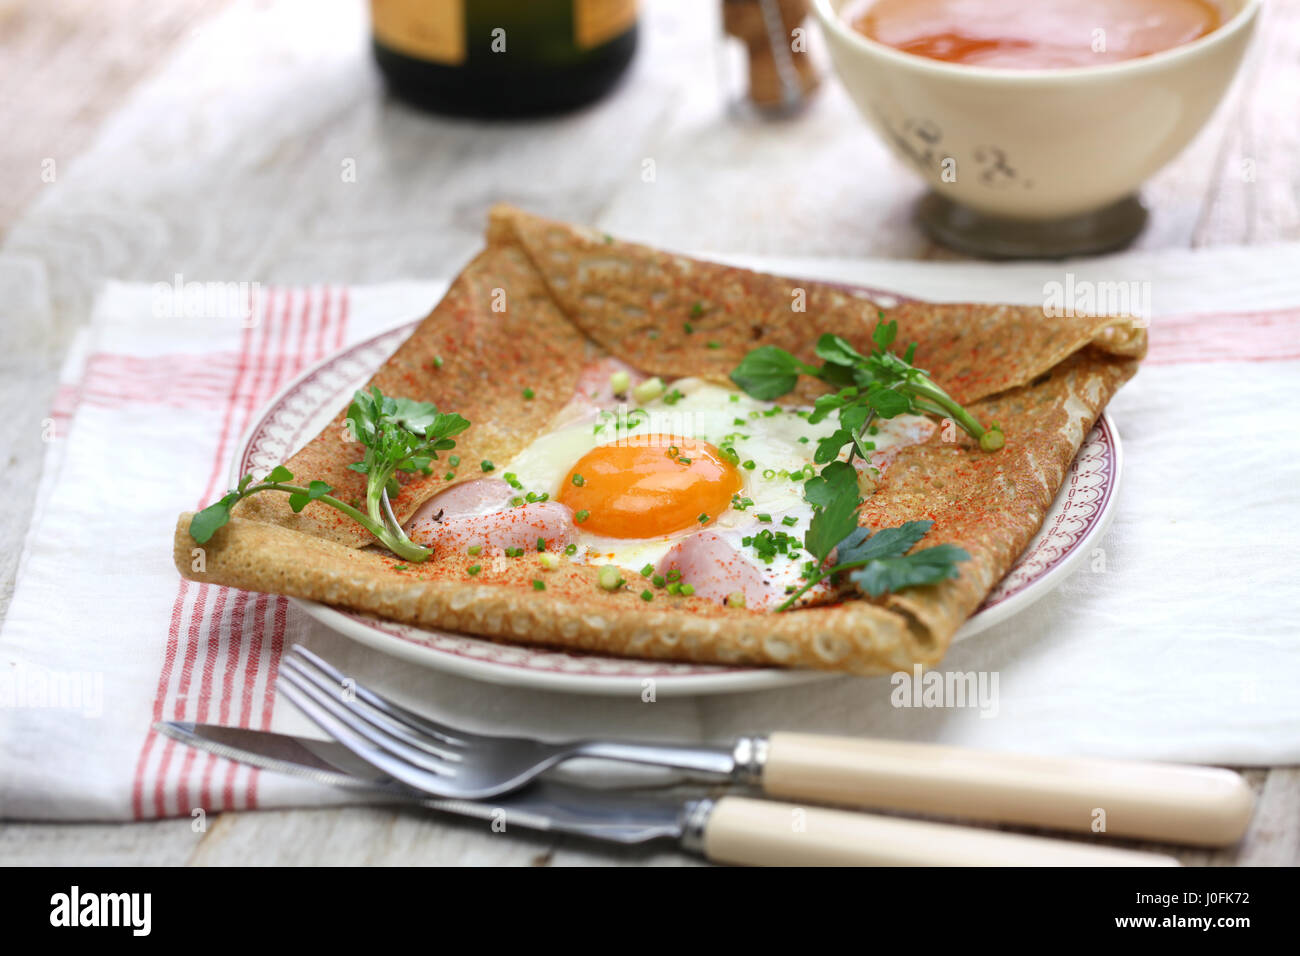 galette sarrasin, buckwheat crepe, french brittany cuisine Stock Photo